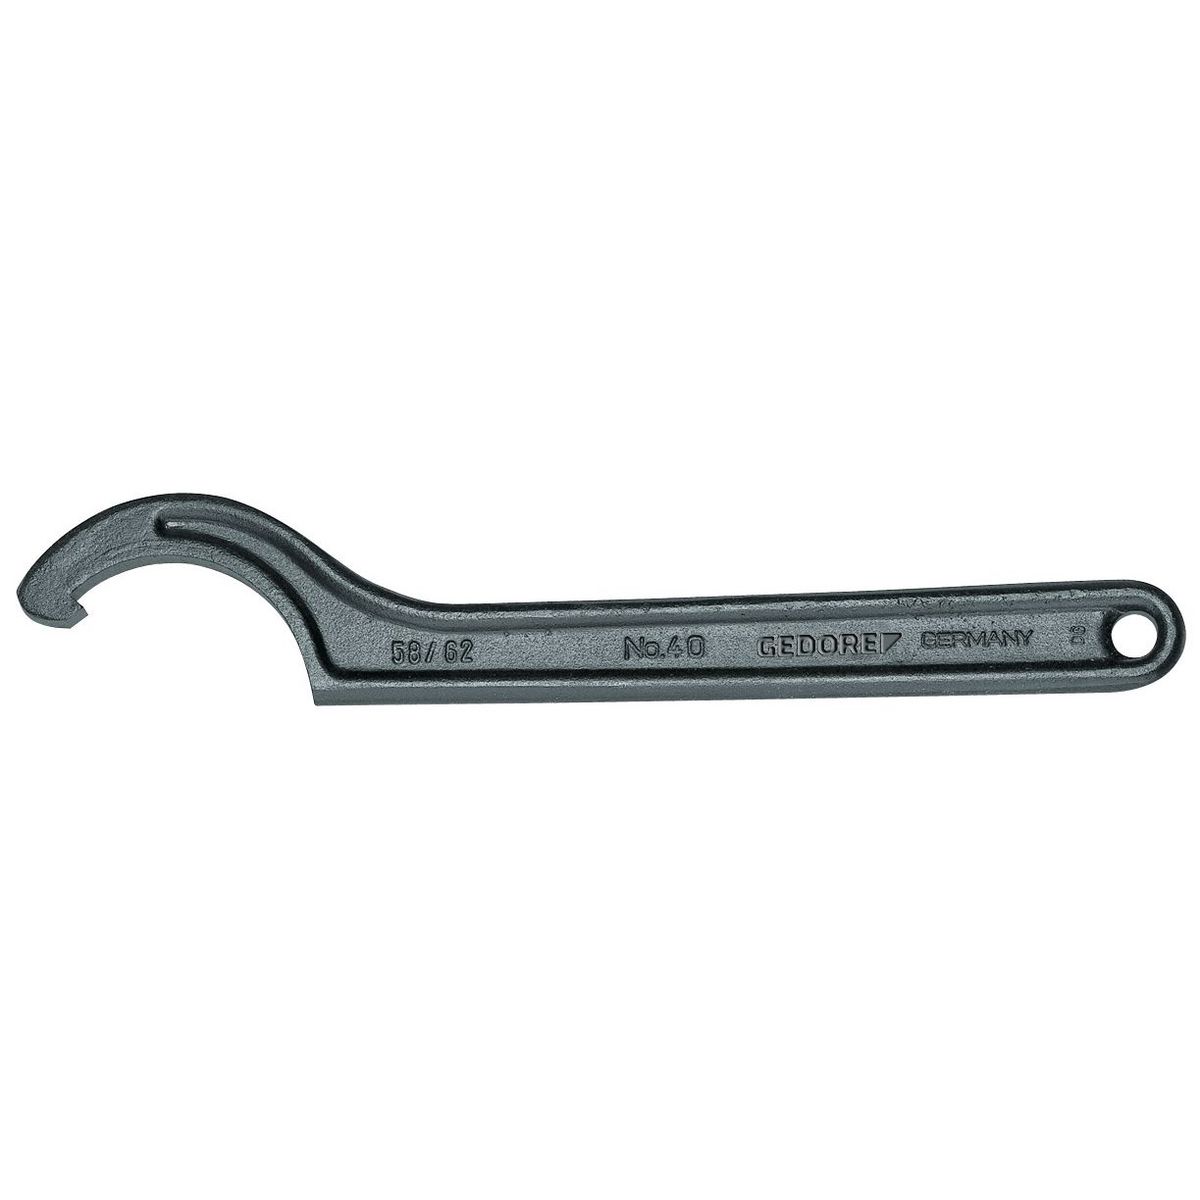 Hook wrench with lug, 205-220mm No.40 205-220 Gedore